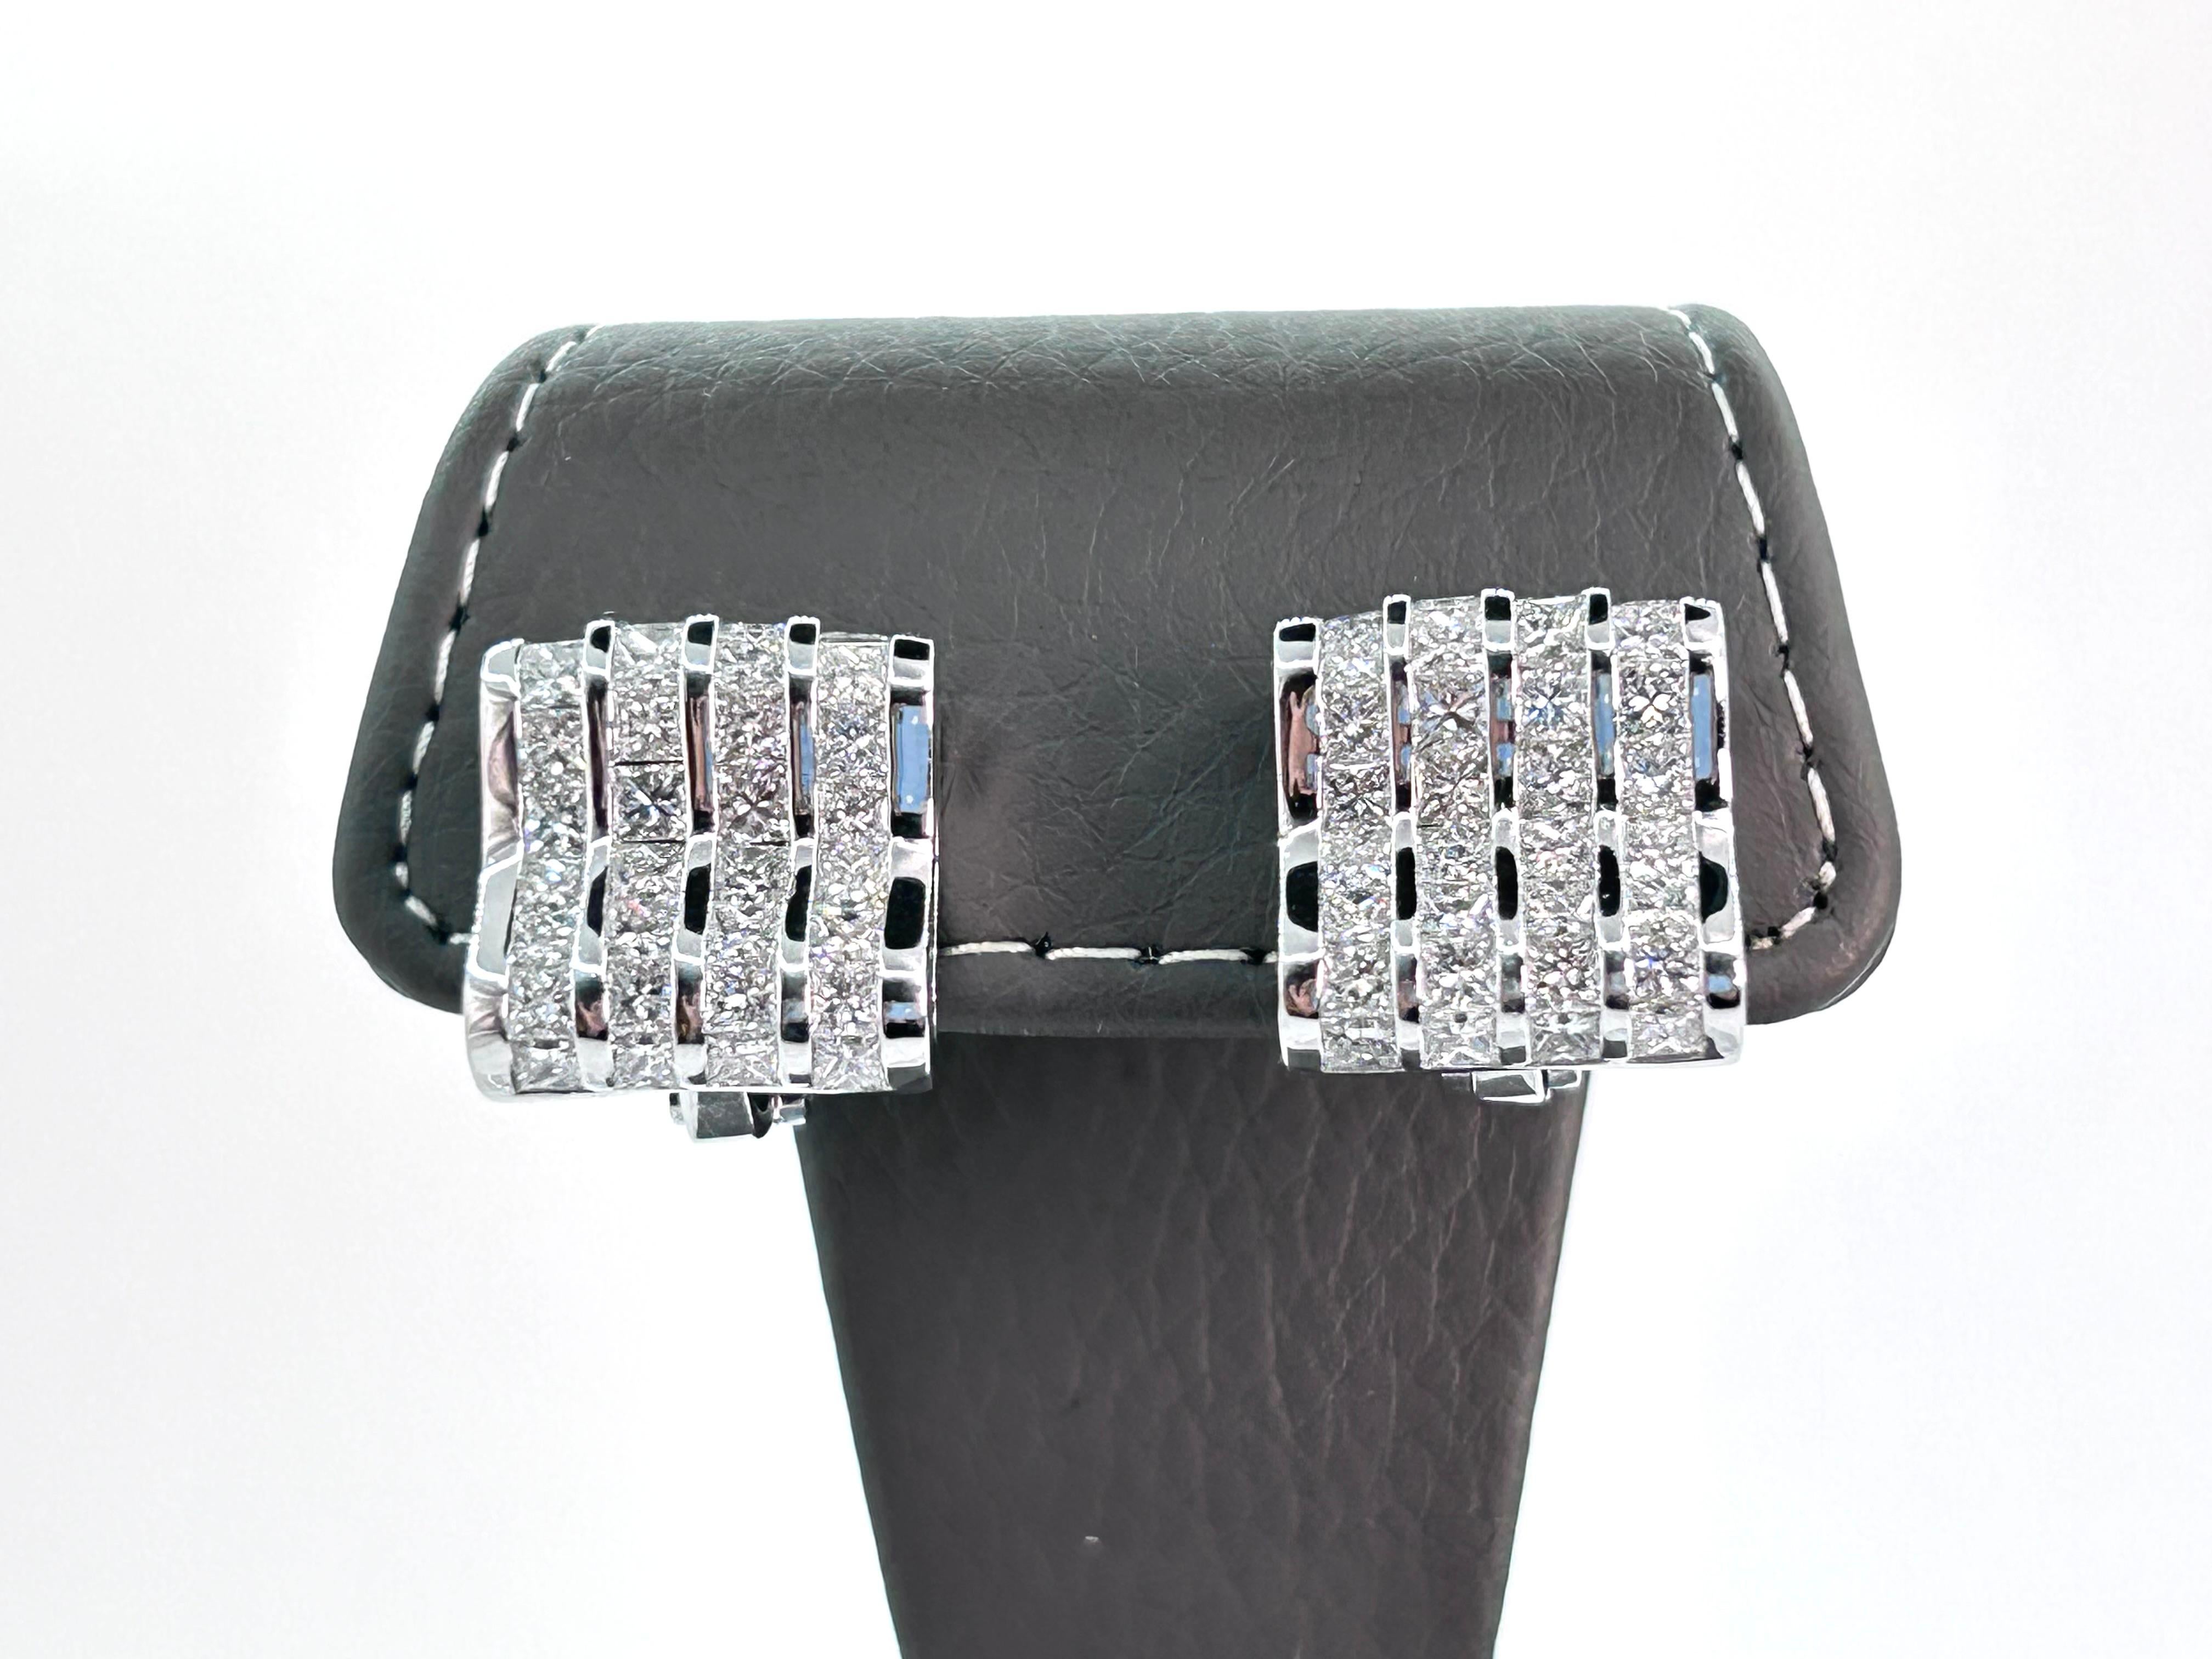 Beautiful Diamond Earrings made by Luca Carati, Italy.
Superb Quality Throughout!
7.00 Carat Total Weight of Princess Cut Diamonds set in 18 Karat White Gold.
Average Diamond Clarity is VS1 and average Color is G.
A wavy design on the Earrings bring